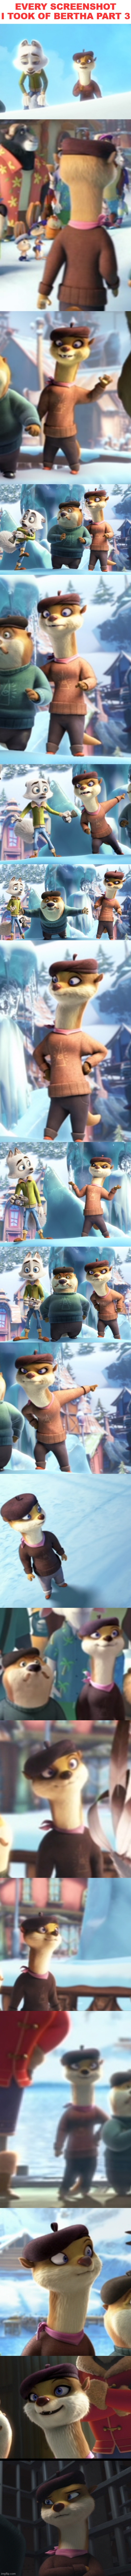 part 3 of the collection of photos of Bertha. I also noticed she has nice eye make up on in the second to last photo. | EVERY SCREENSHOT I TOOK OF BERTHA PART 3 | image tagged in cute,cartoon,otter,movie,wholesome,brothers to the end | made w/ Imgflip meme maker